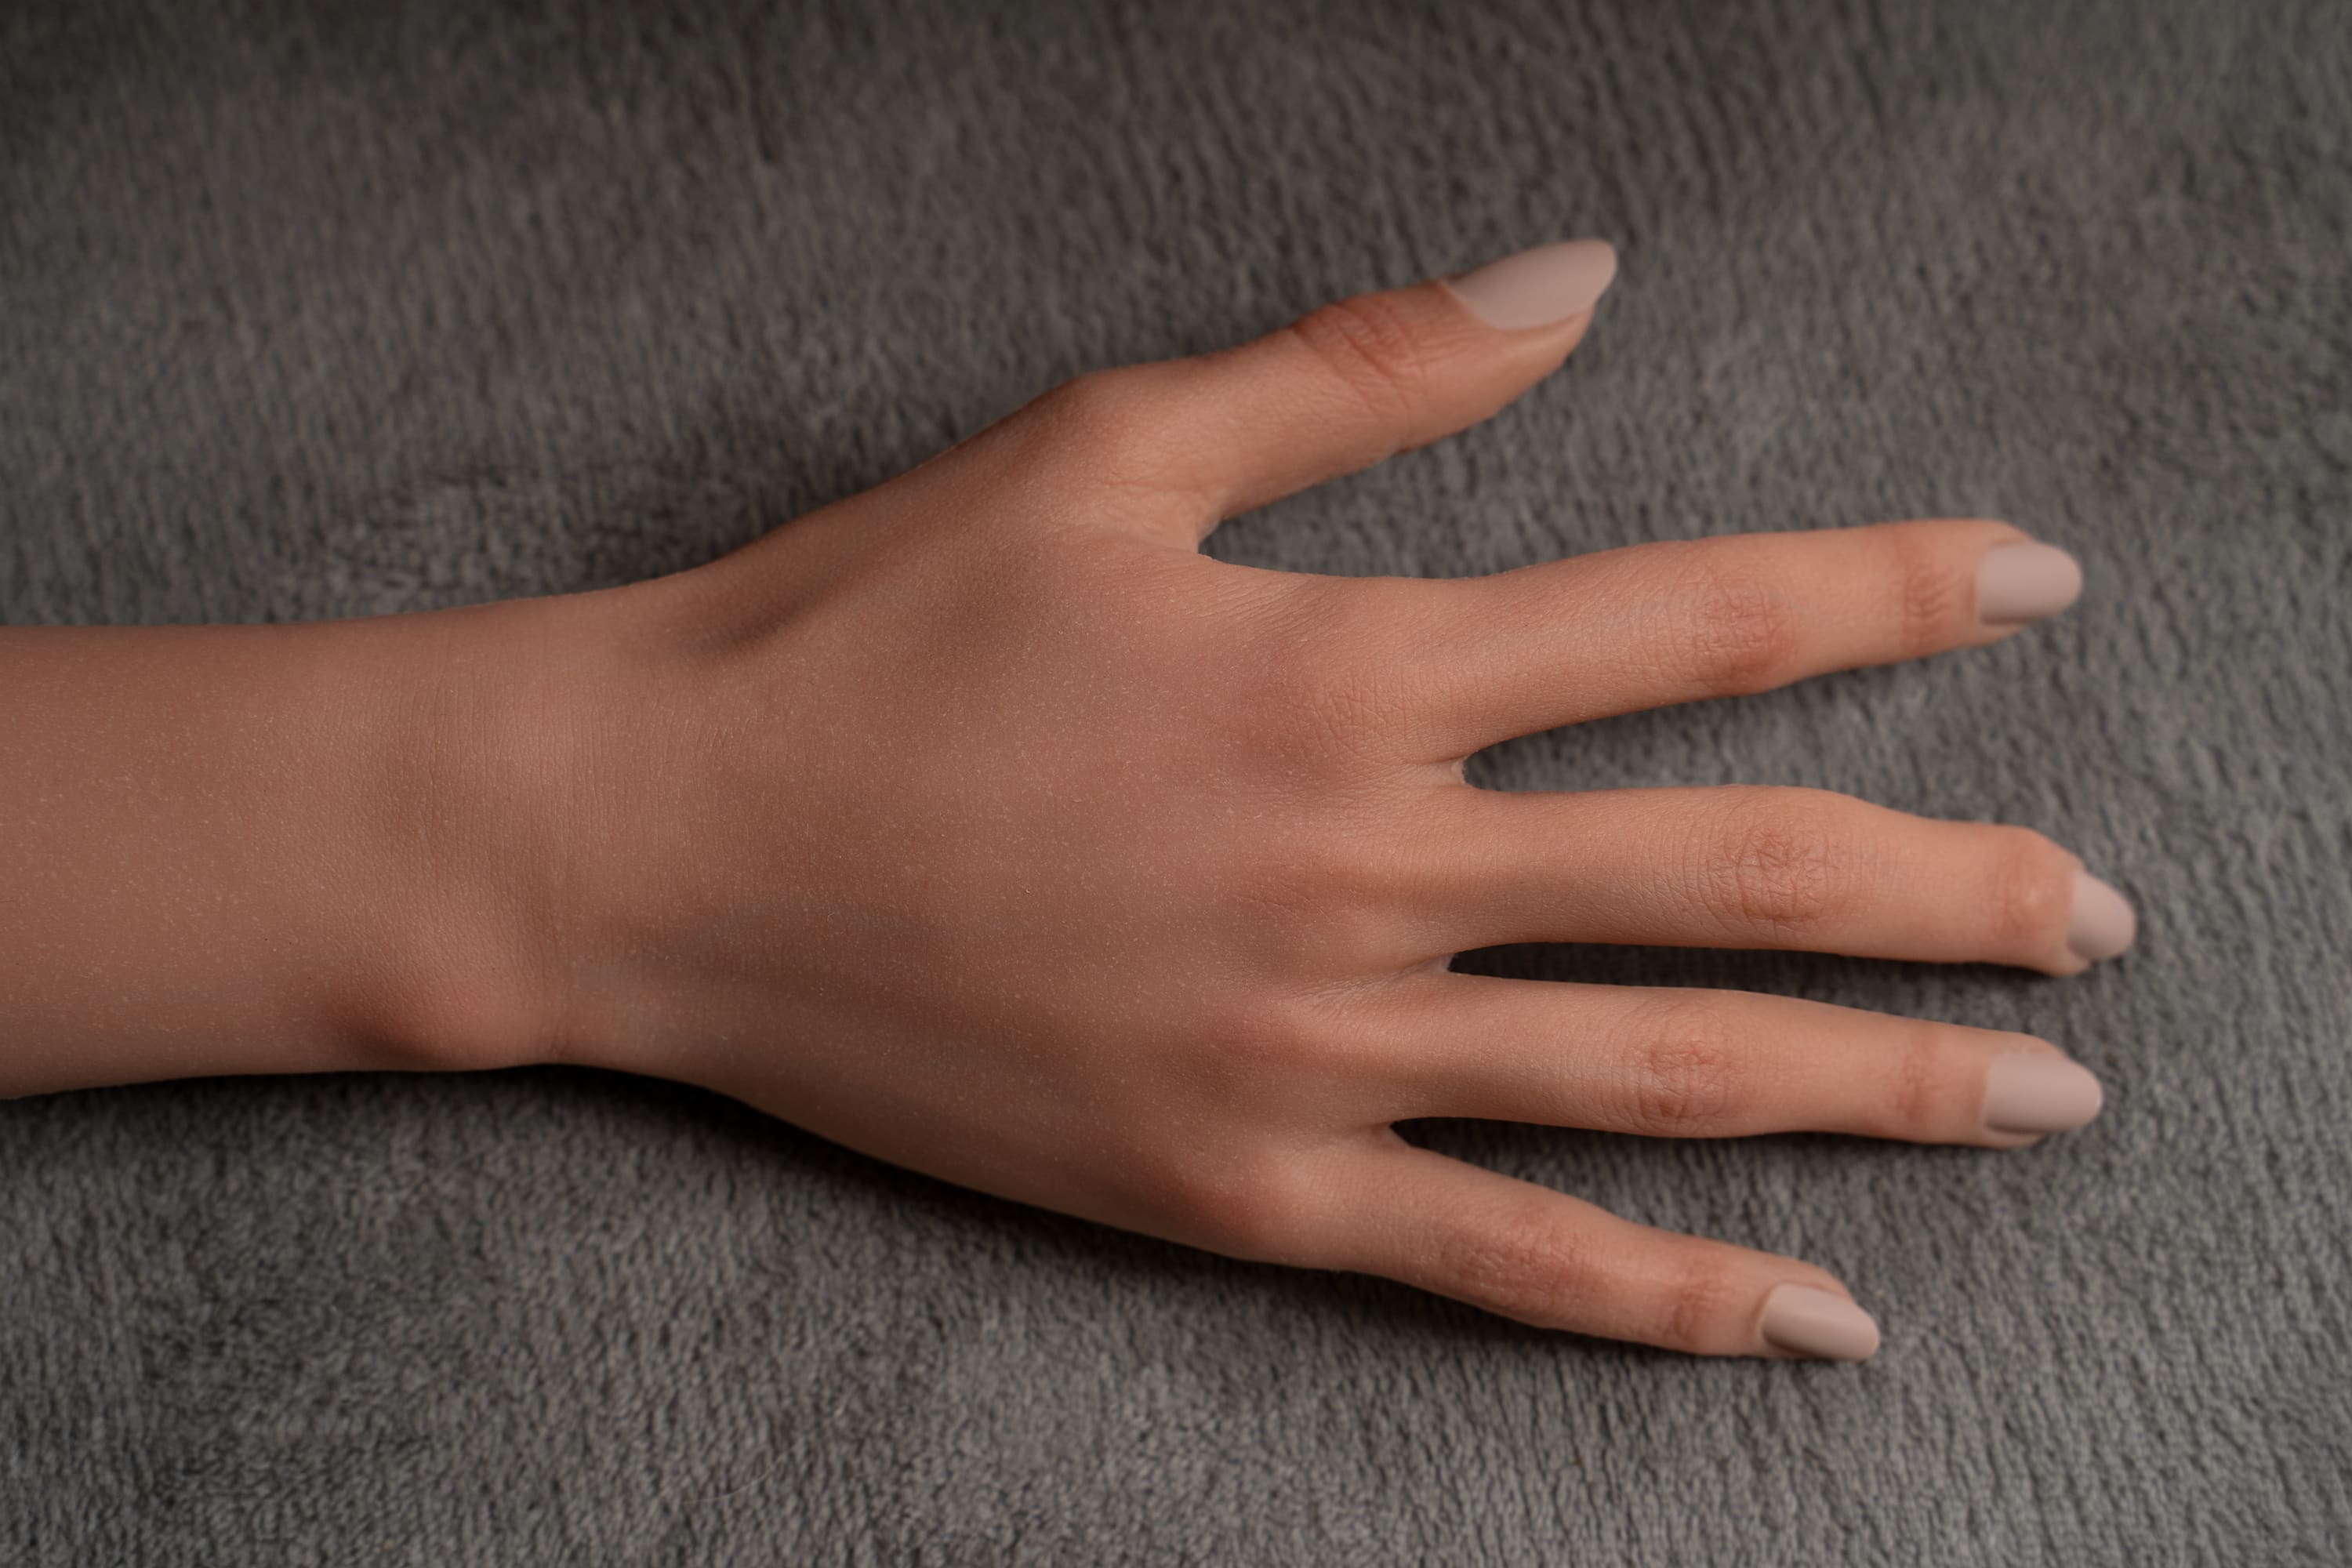 haZelex realistic Silicone Tanned Sex Doll - Ulrica hands